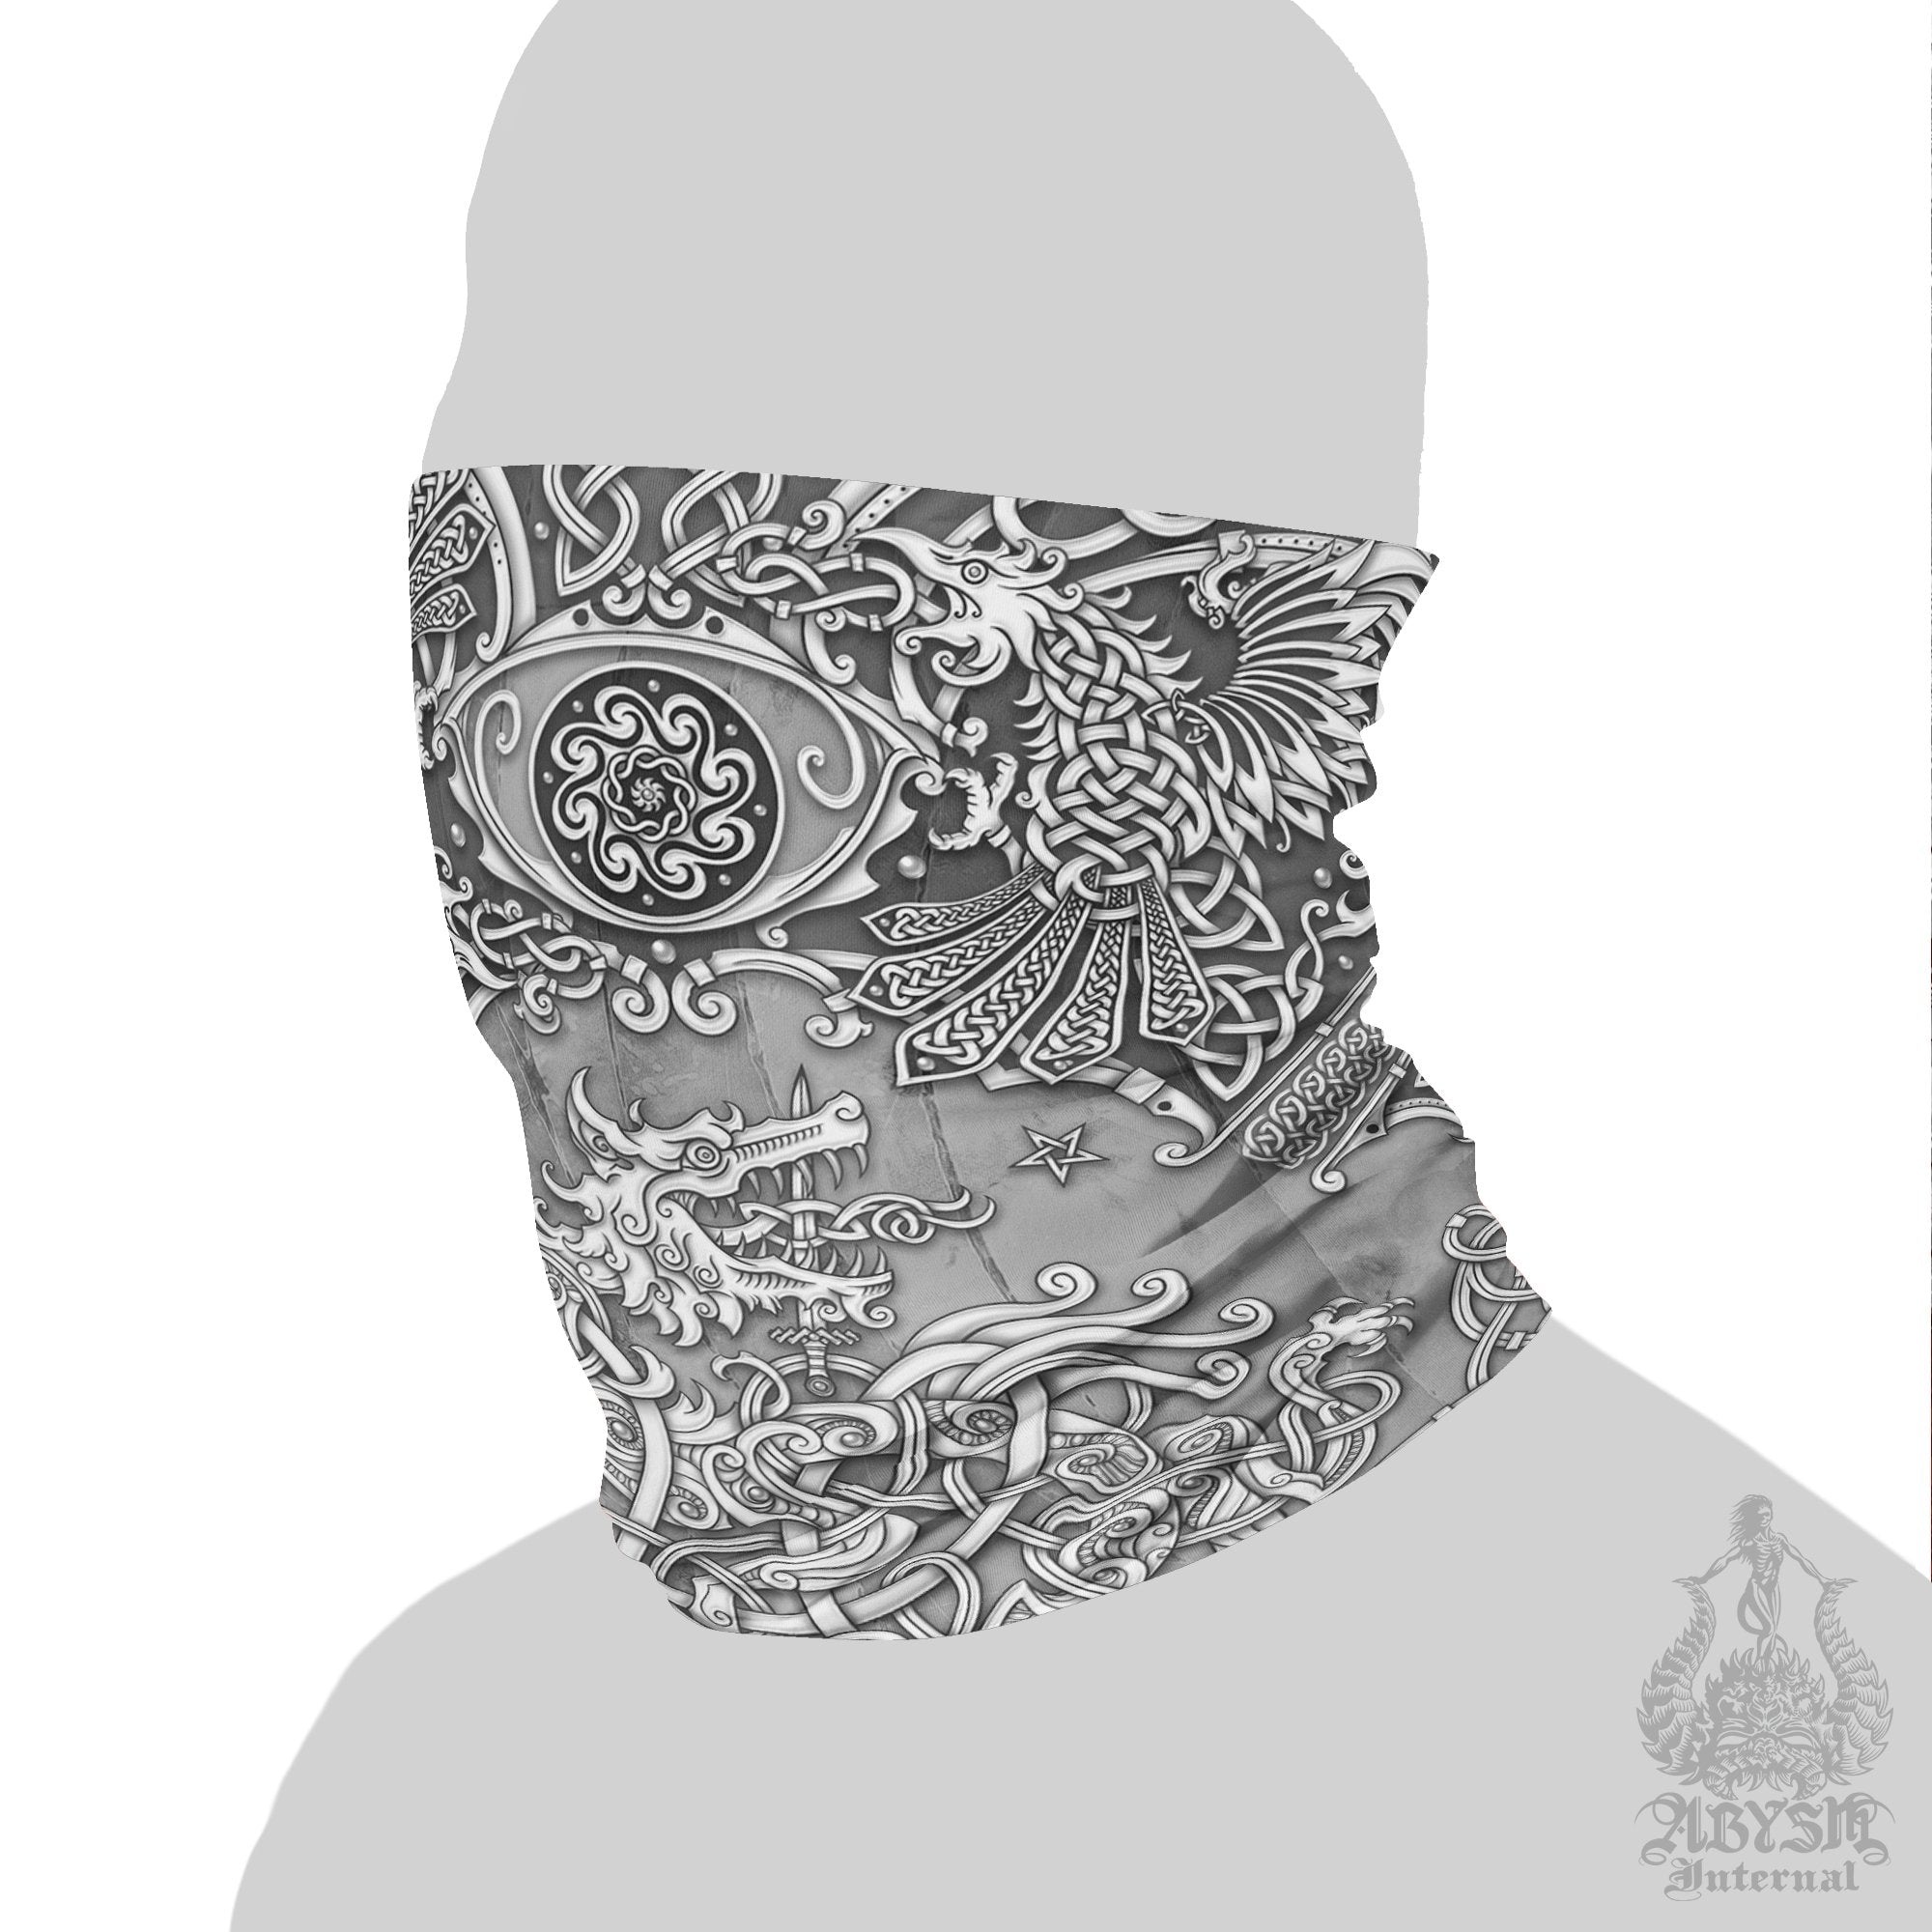 Viking Neck Gaiter, Fenrir Face Mask, Norse Wolf Printed Head Covering, Nordic Art - Stone - Abysm Internal